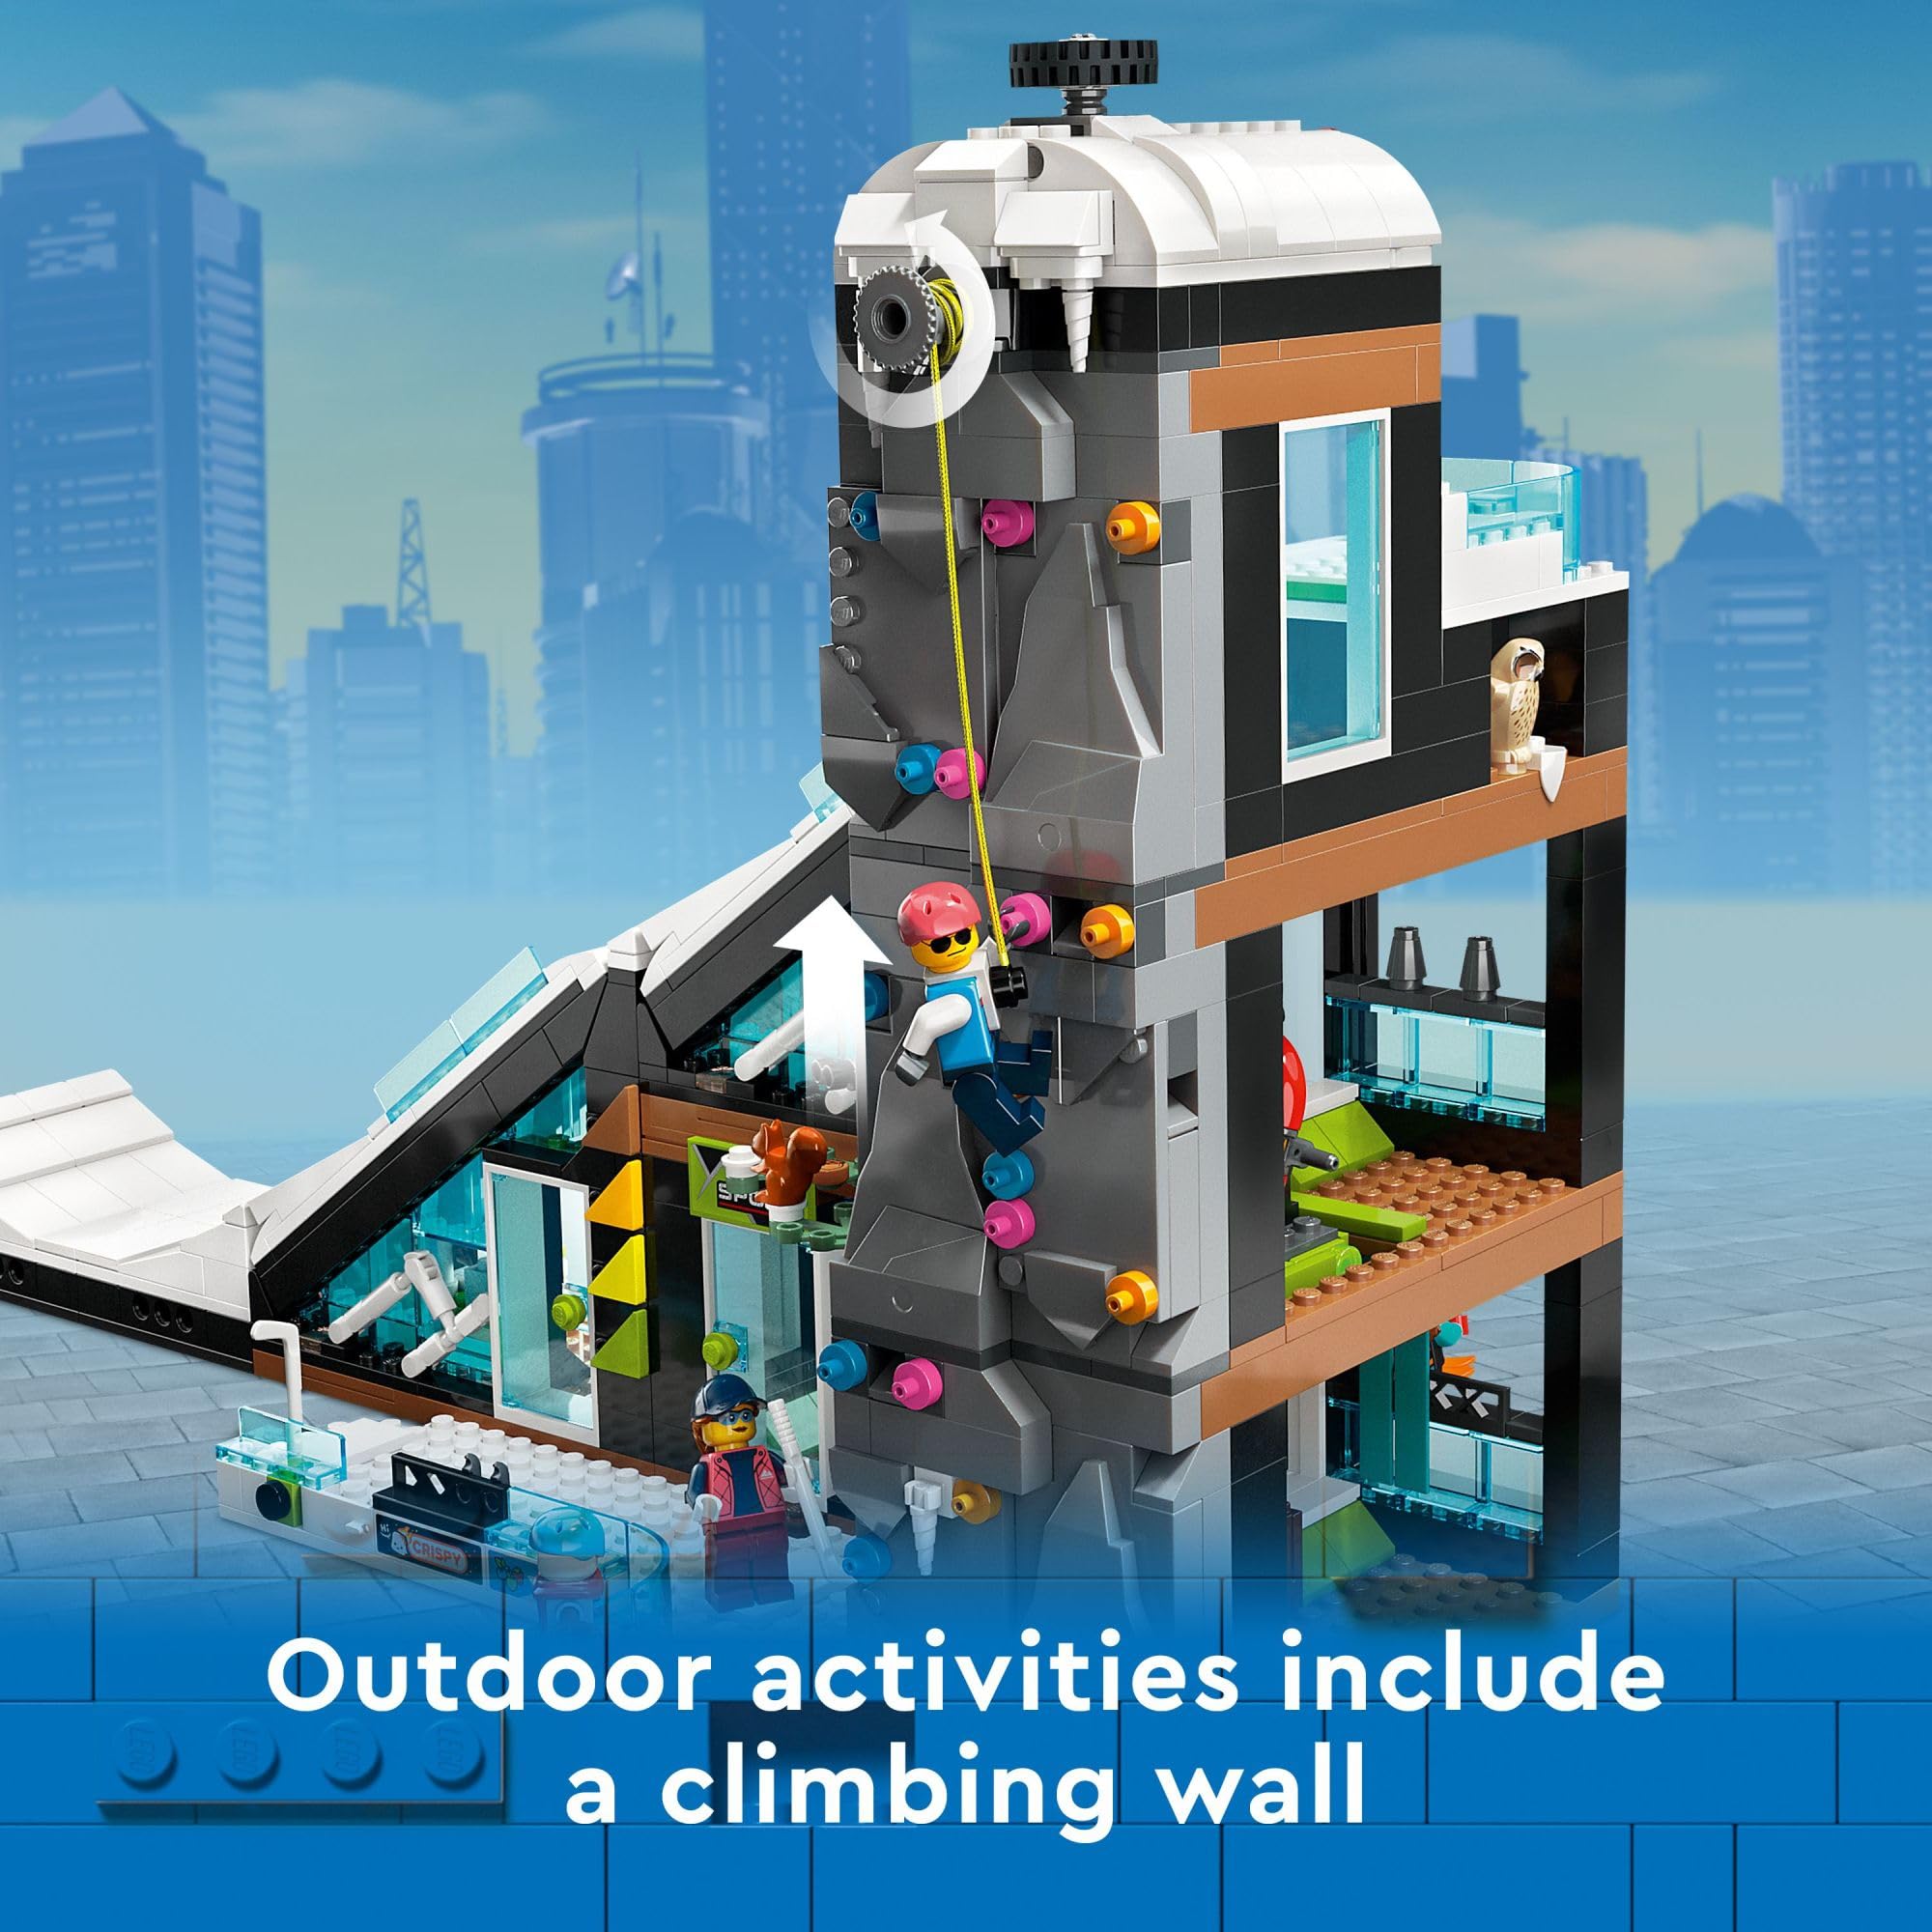 LEGO City Ski and Climbing Center 60366 Building Toy Set, 3-Level Building with a Ski Slope, 8 Minifigures and 2 Animal Figures for Imaginative Winter Sports Play, Fun Gift Idea for Kids and Ski Fans